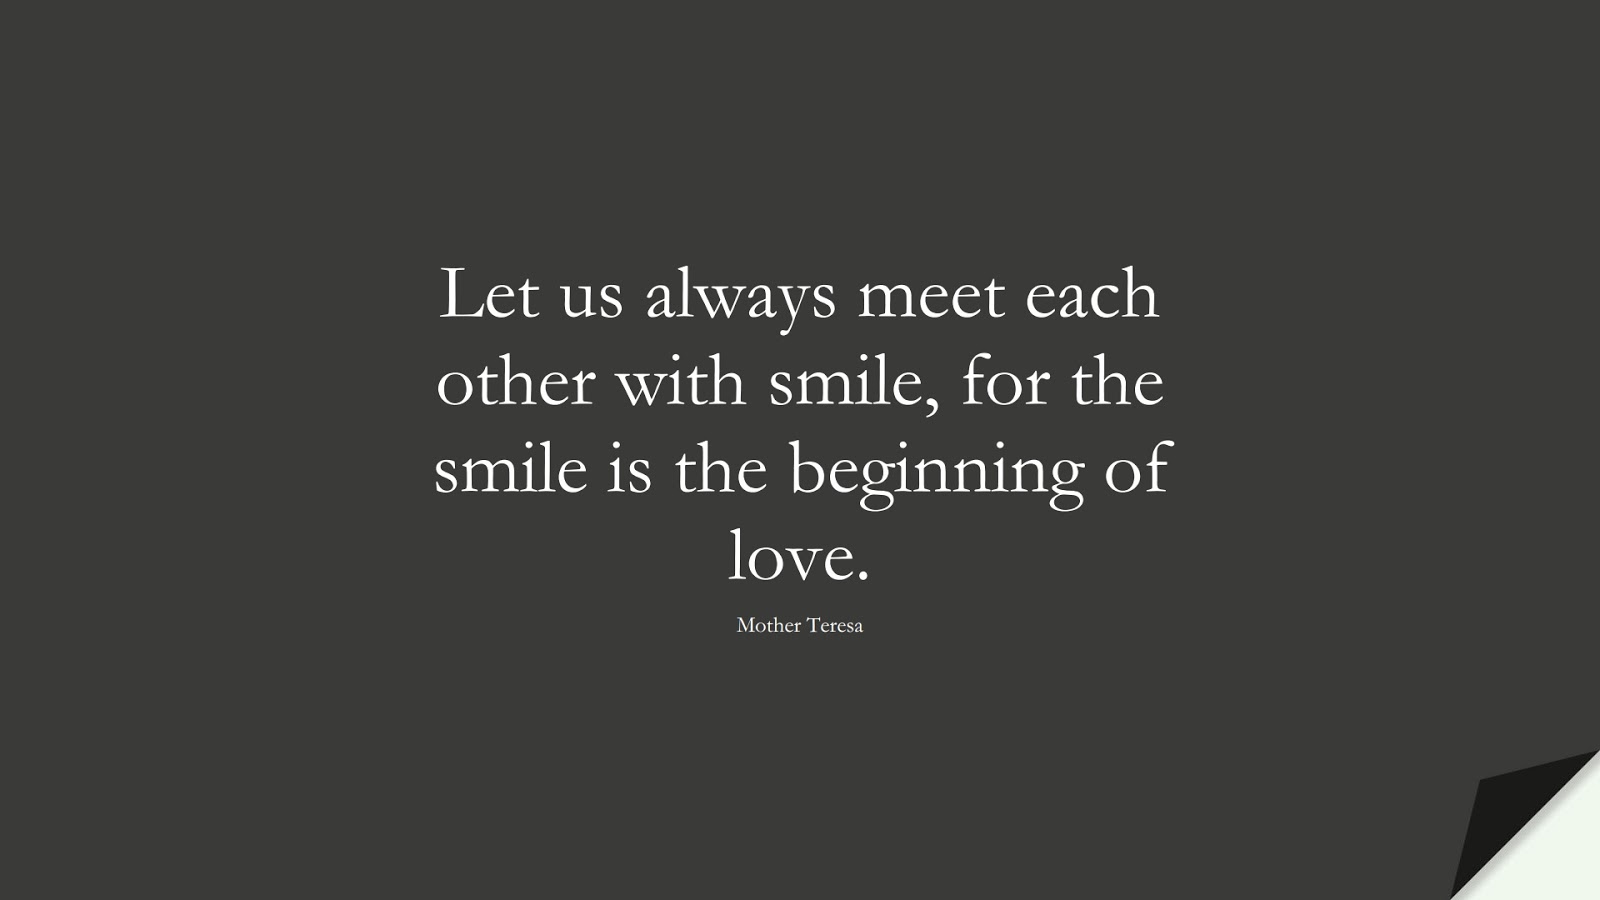 Let us always meet each other with smile, for the smile is the beginning of love. (Mother Teresa);  #PositiveQuotes